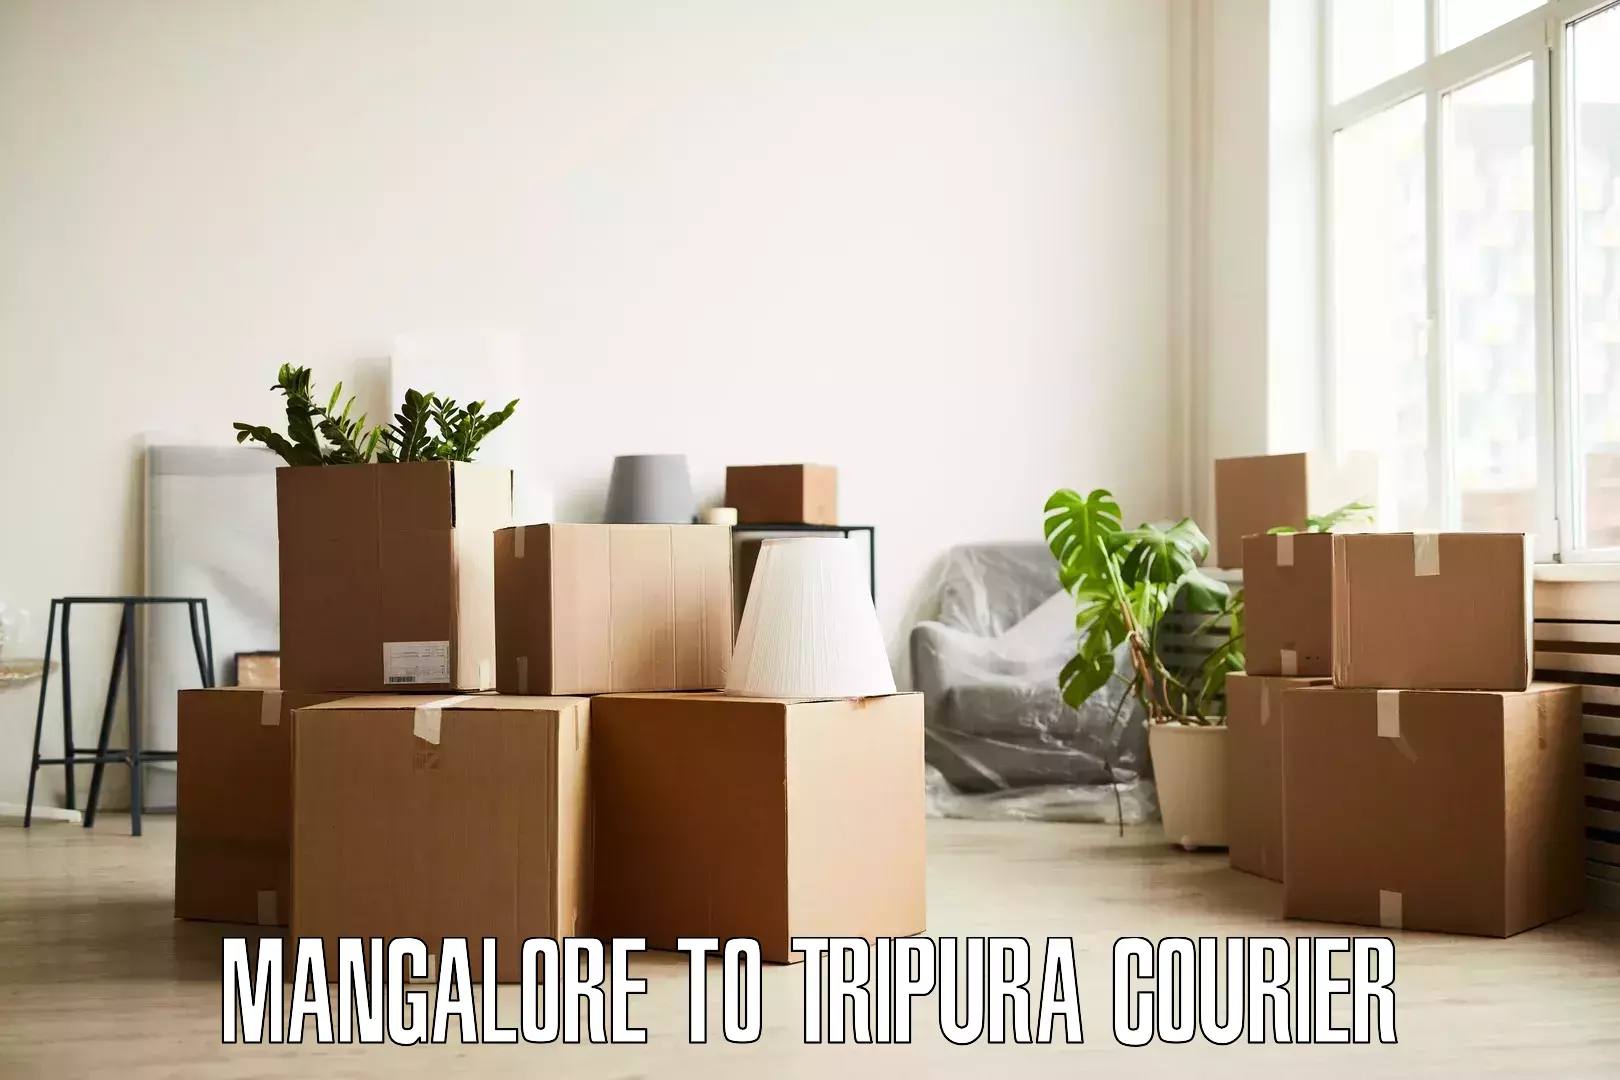 Trusted relocation experts Mangalore to Tripura